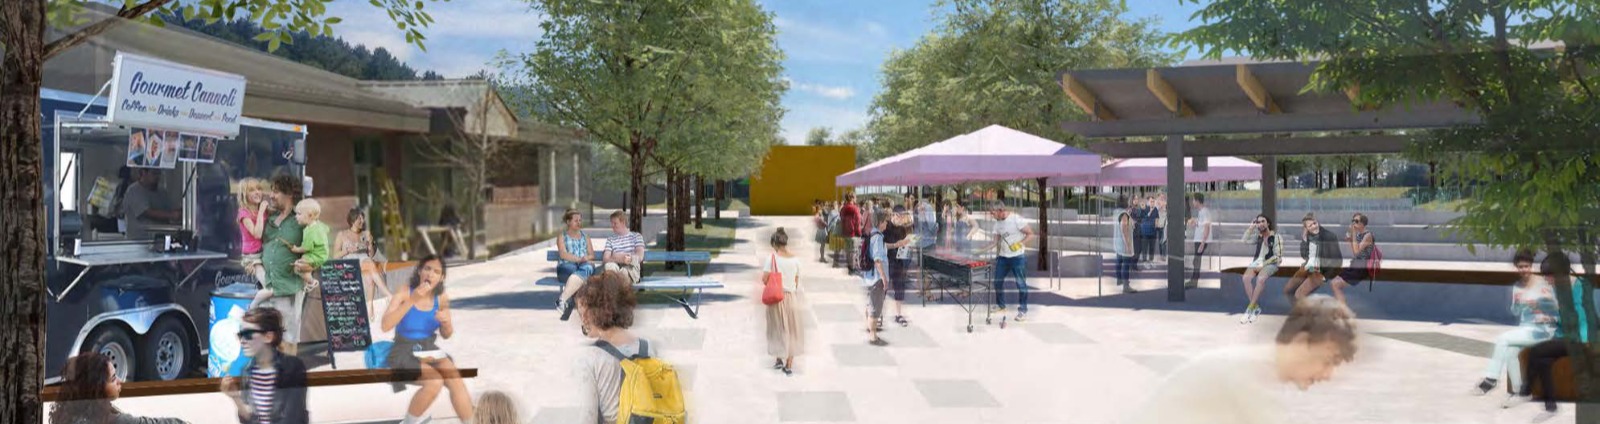 Design rendering of town square featuring market set up